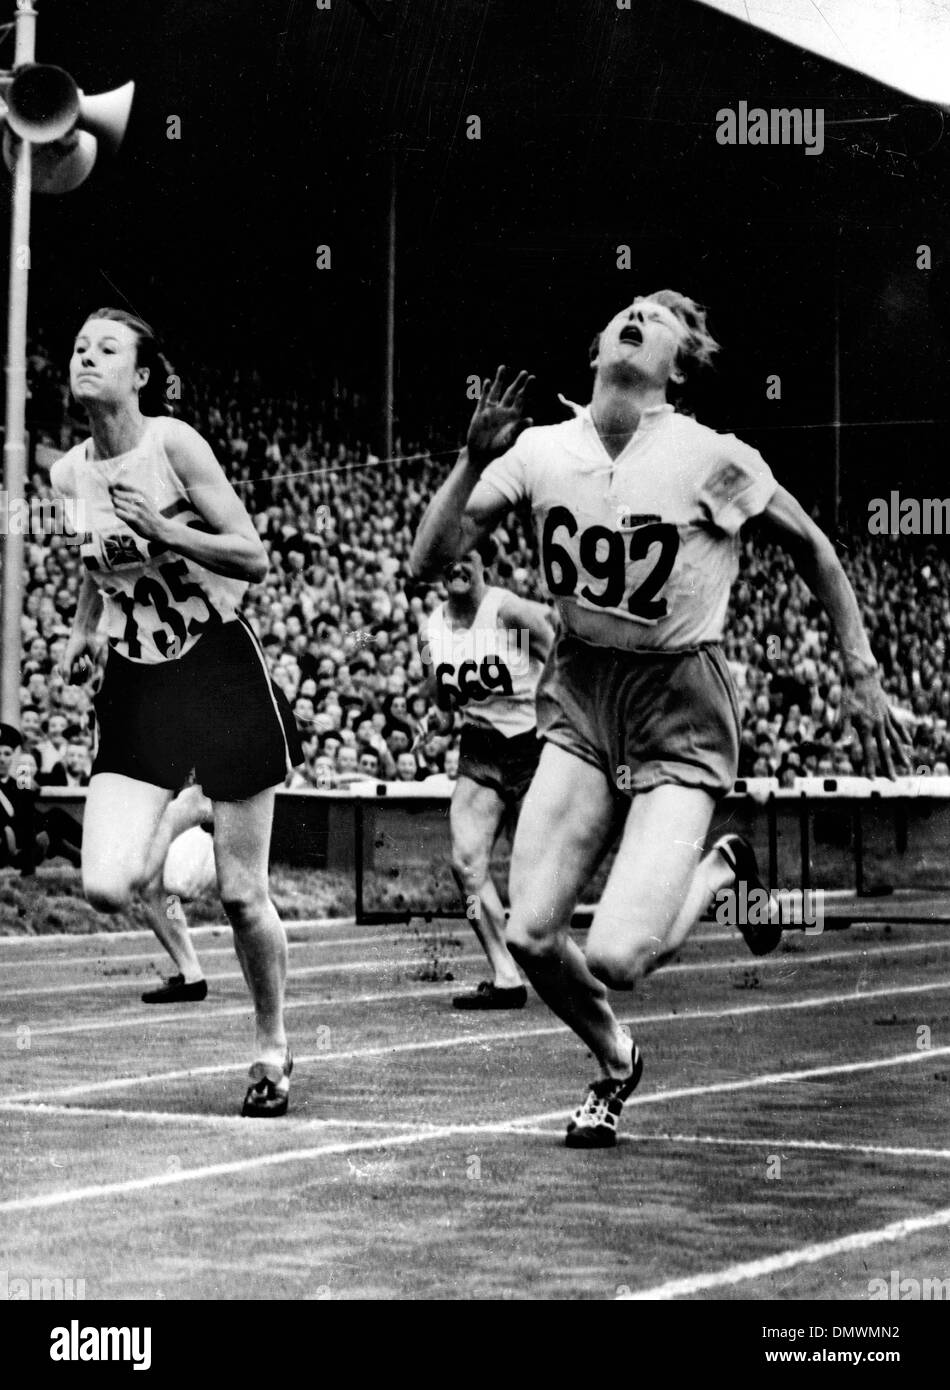 Aug. 4, 1948 - London, England, U.K. - The 1948 Summer Olympics were held in London, they were the first Summer Olympics since the 1936 Berlin Games due to World War II.  PICTURED: The dramatic finish of the 80 meter hurdles, won by F.E. BLANKERS-KOEN (R) of Holland.  (Credit Image: © KEYSTONE Pictures USA/ZUMAPRESS.com) Stock Photo